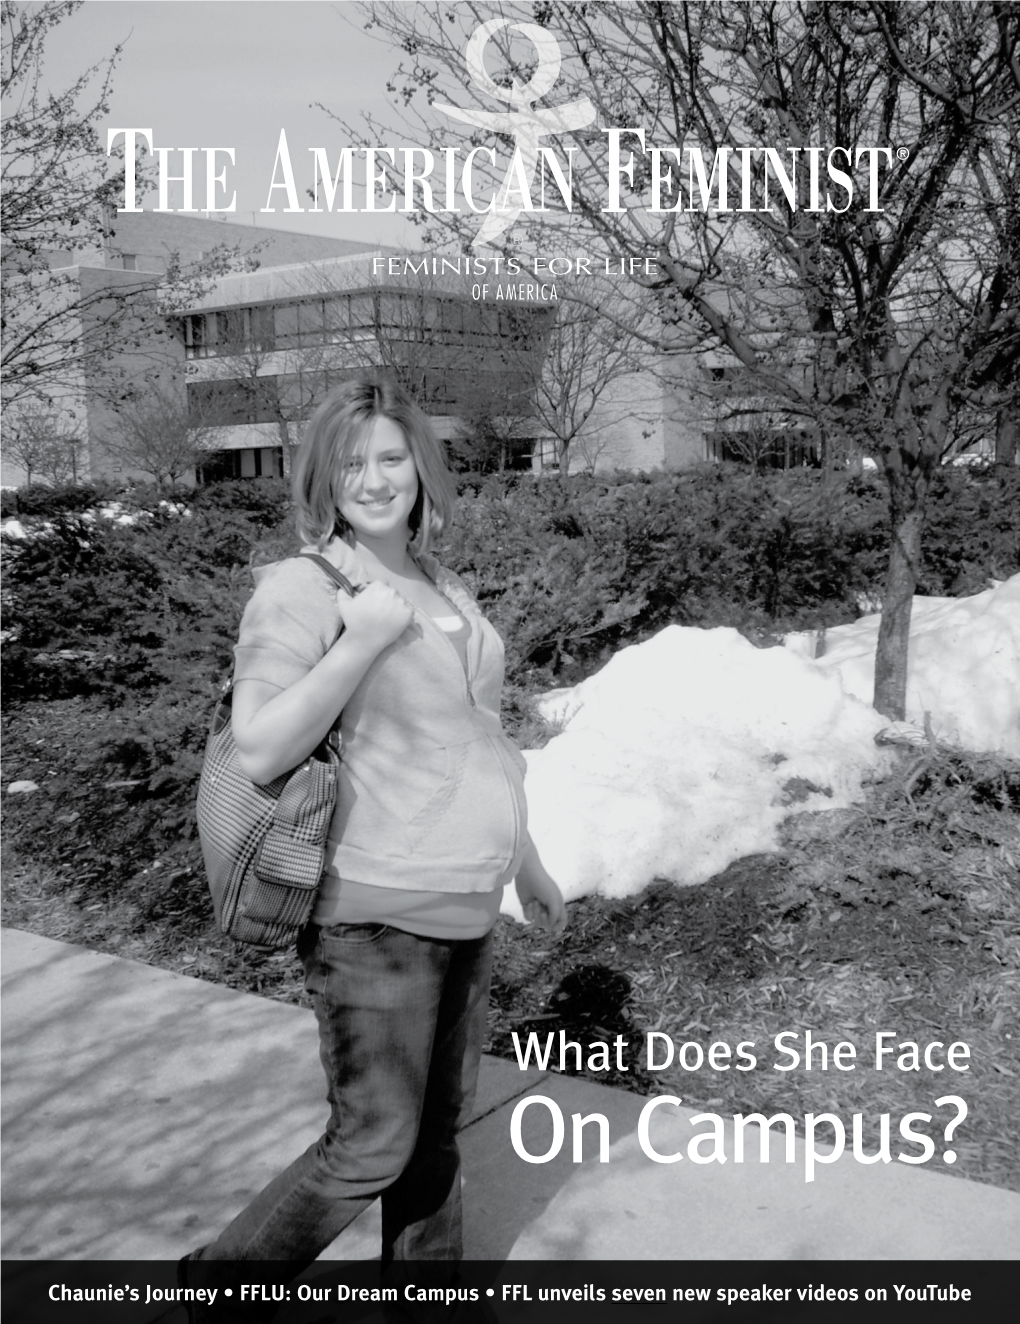 Fall-Winter 2008: What Does She Face on Campus?